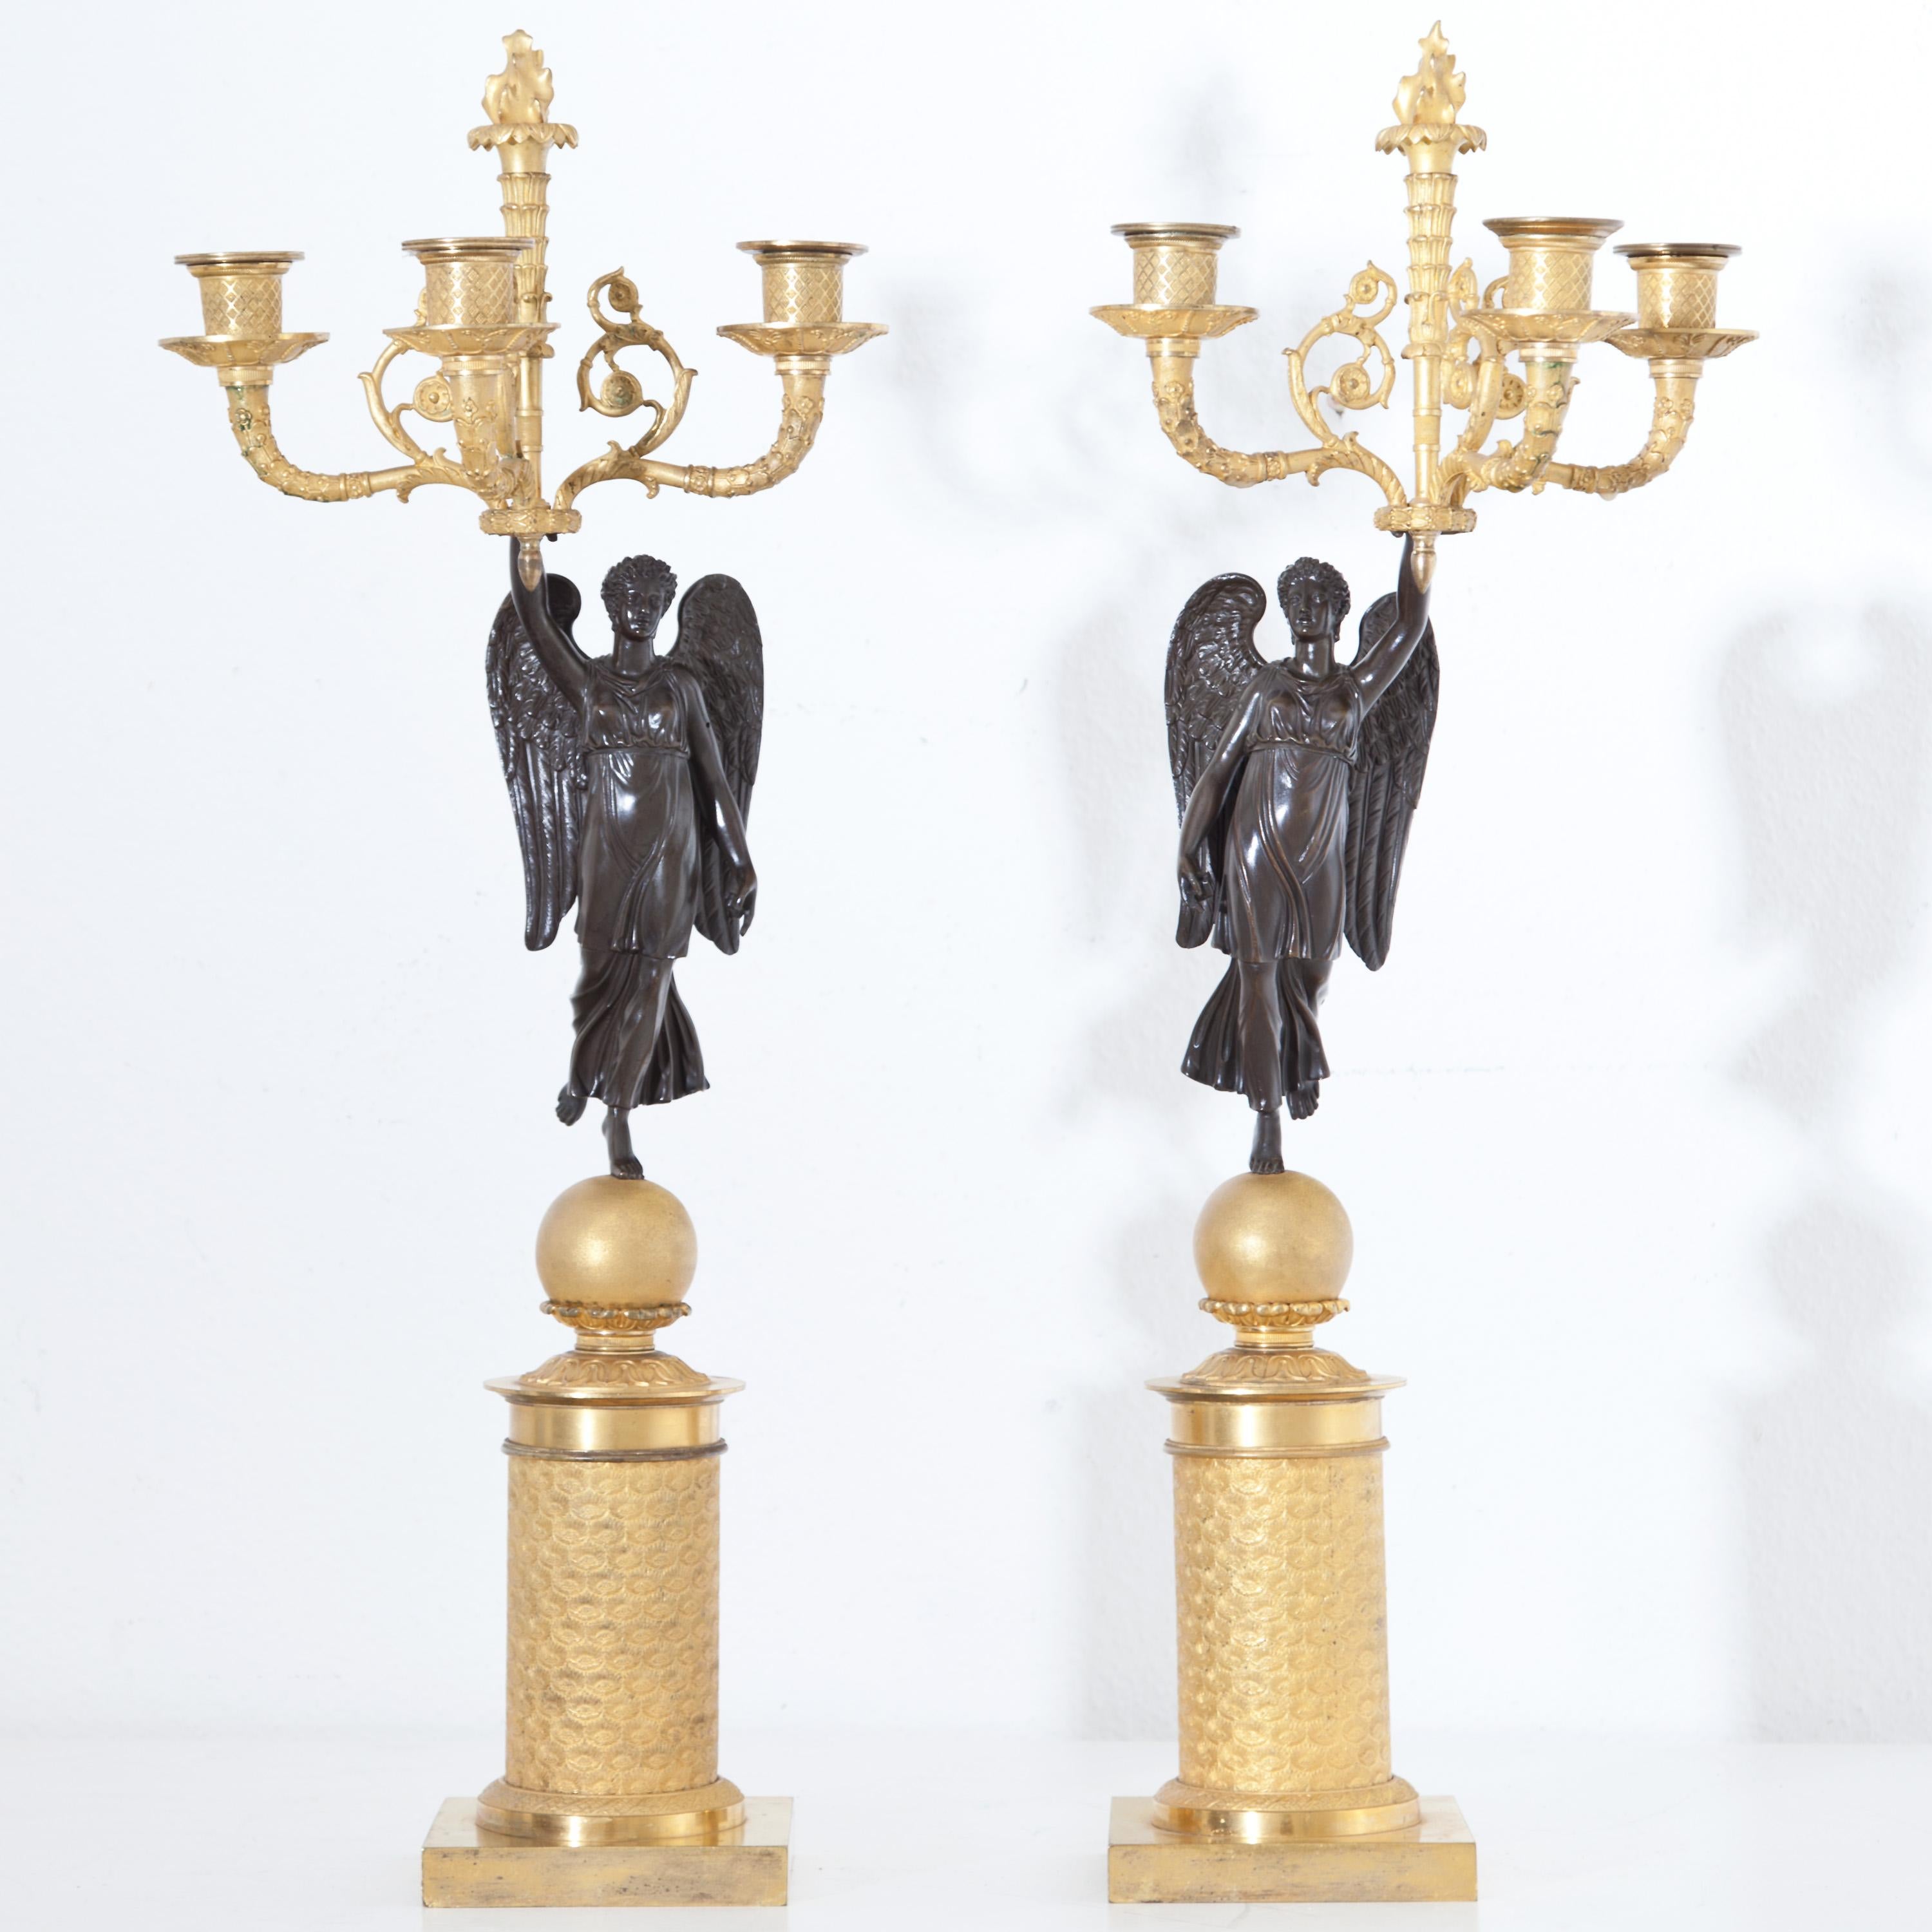 Pair of Empire Girandoles made of partly fire-gilded bronze with winged Nikes standing on spheres. The goddesses of victory are of opposite designs. They gracefully hold in their raised left and right hands, respectively, a laurel wreath which is